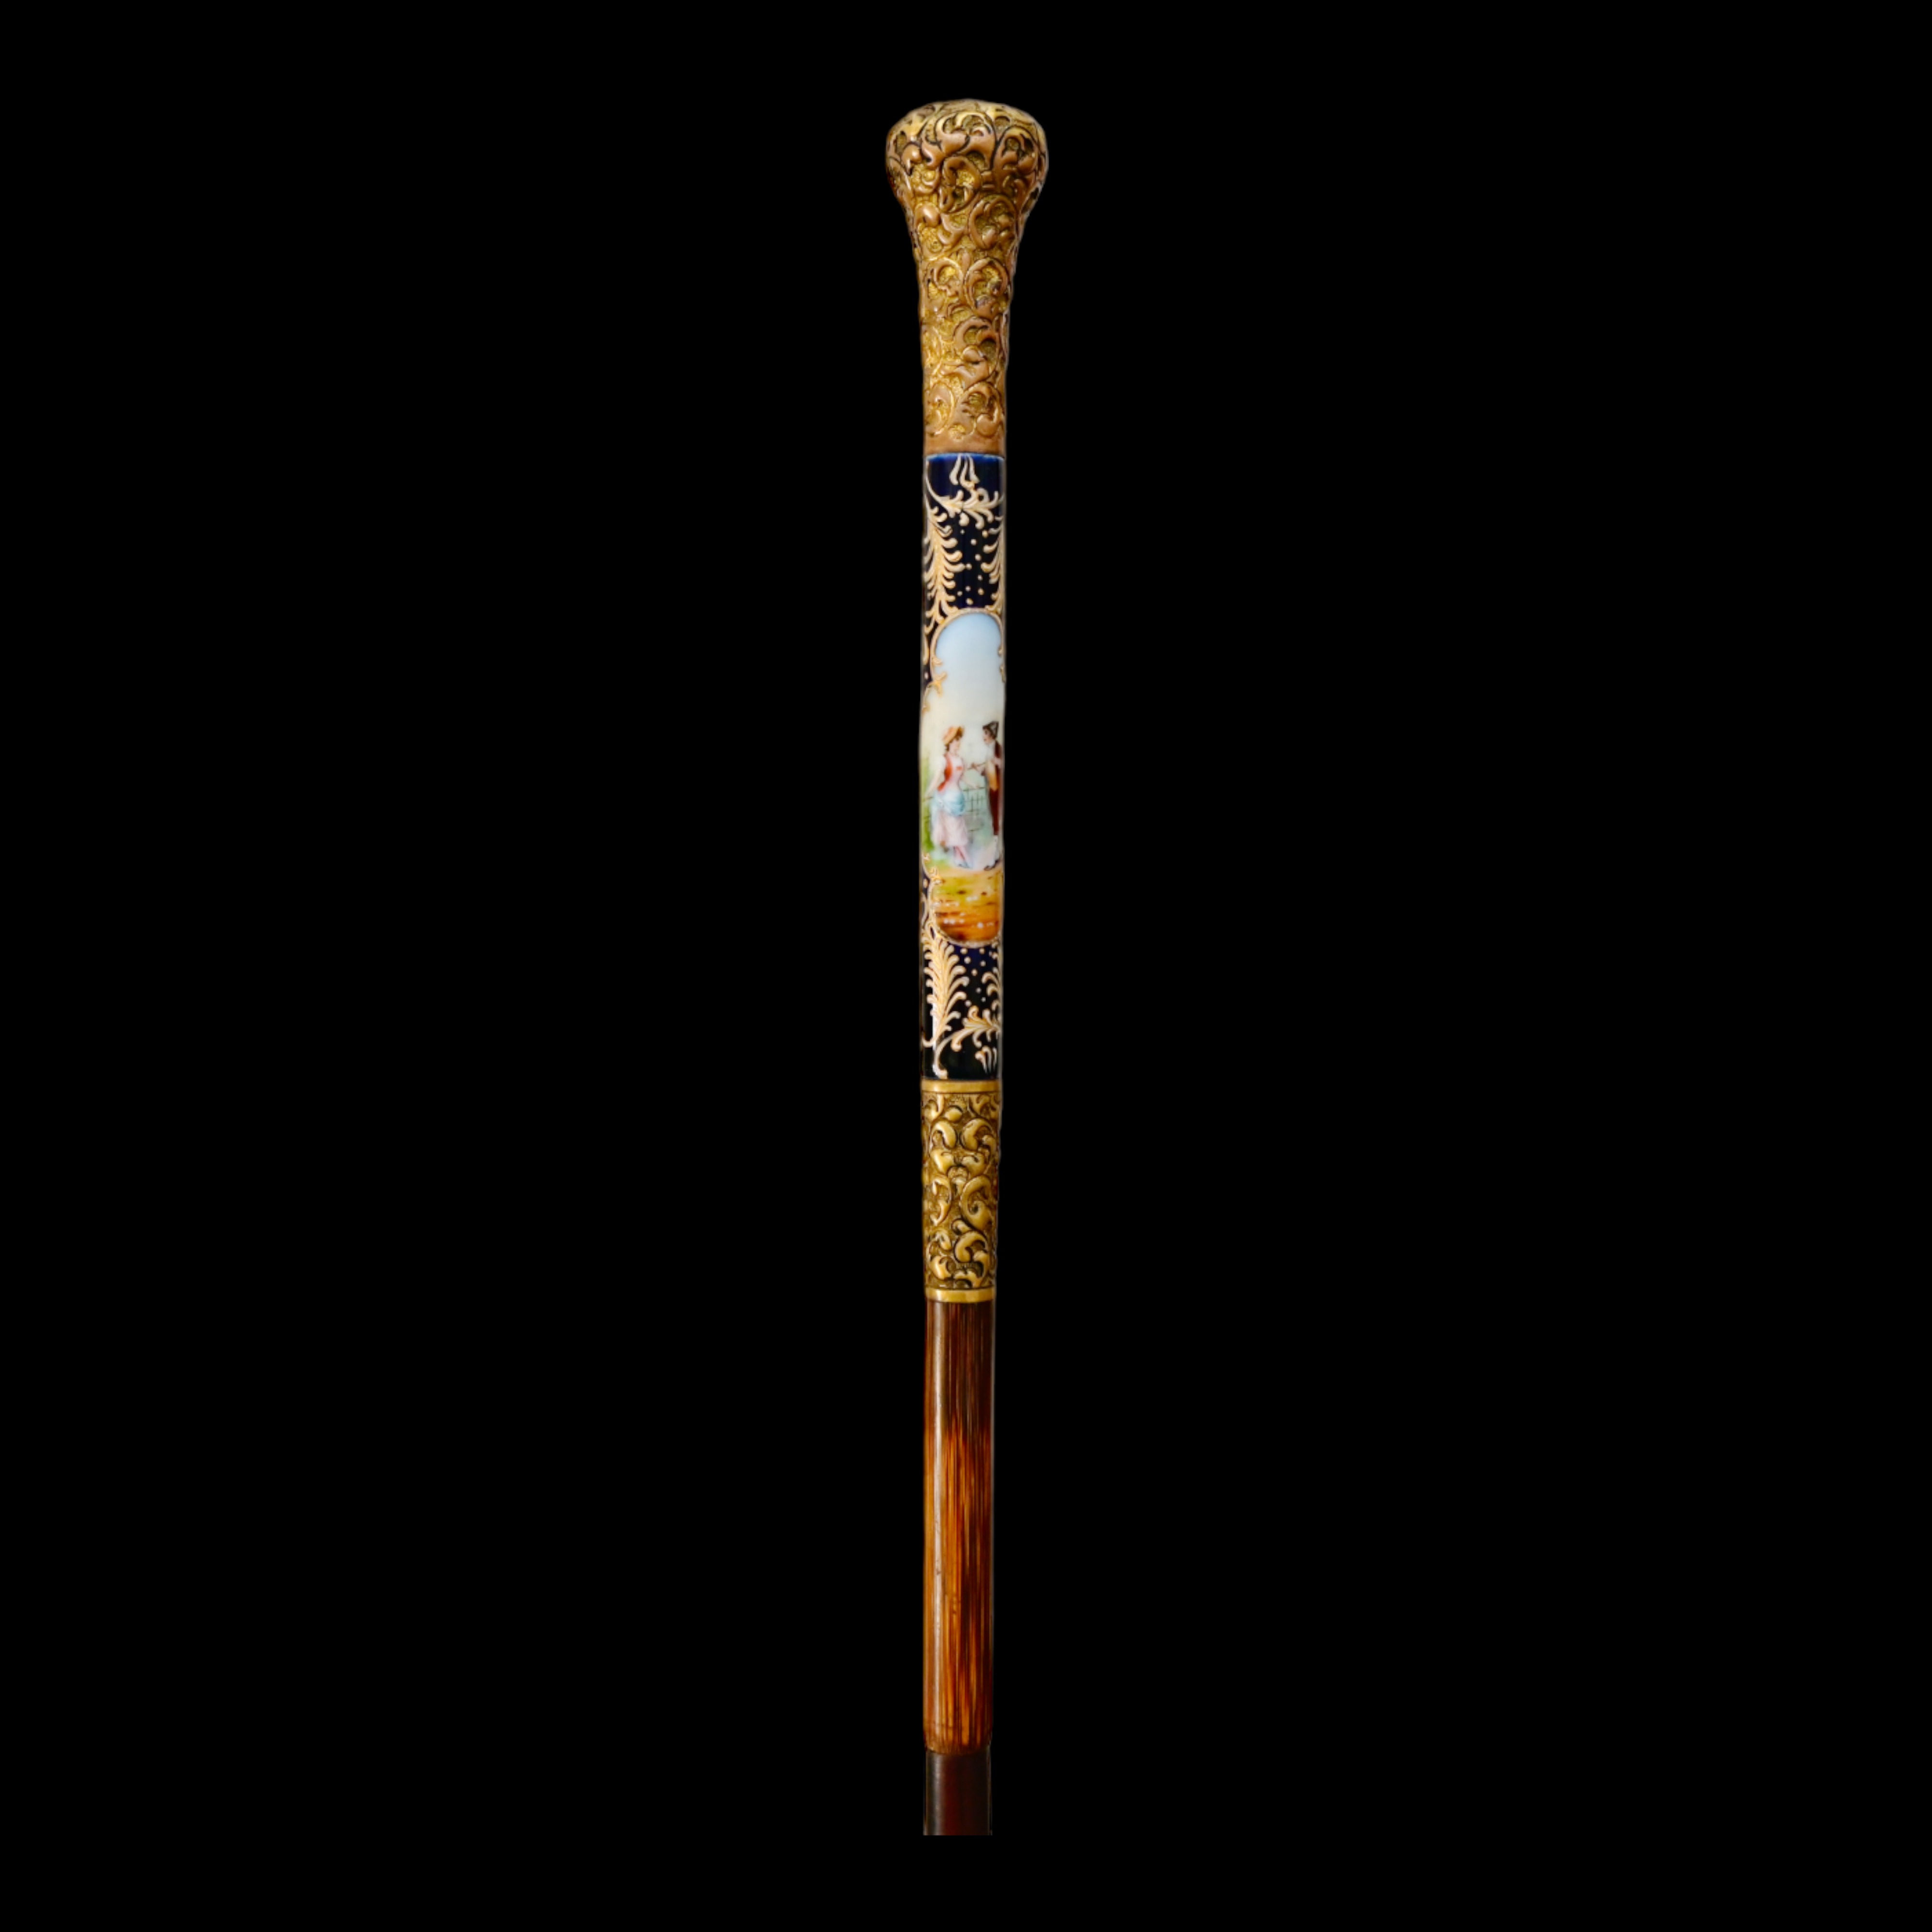 Rare Cane with Porcelain part. Limoge Porcelain Manufactory. France, 19th century. - Image 3 of 12